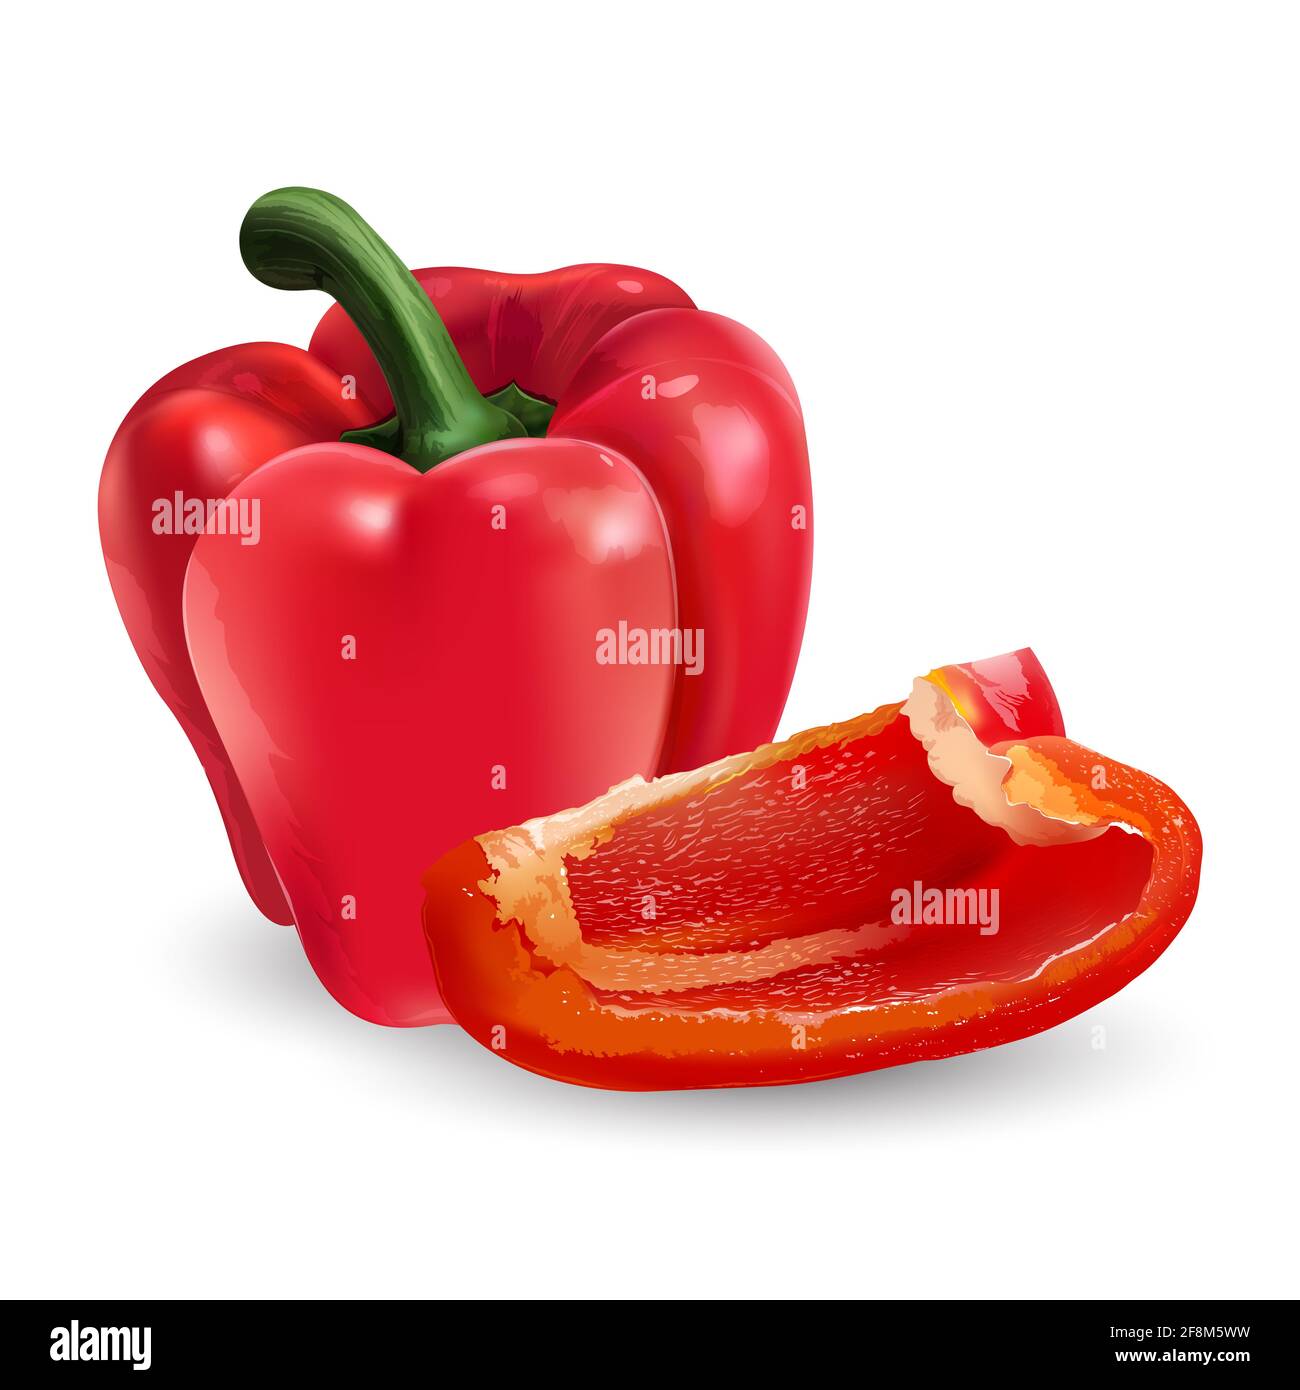 Whole red bell pepper with a slice on white background. Stock Photo